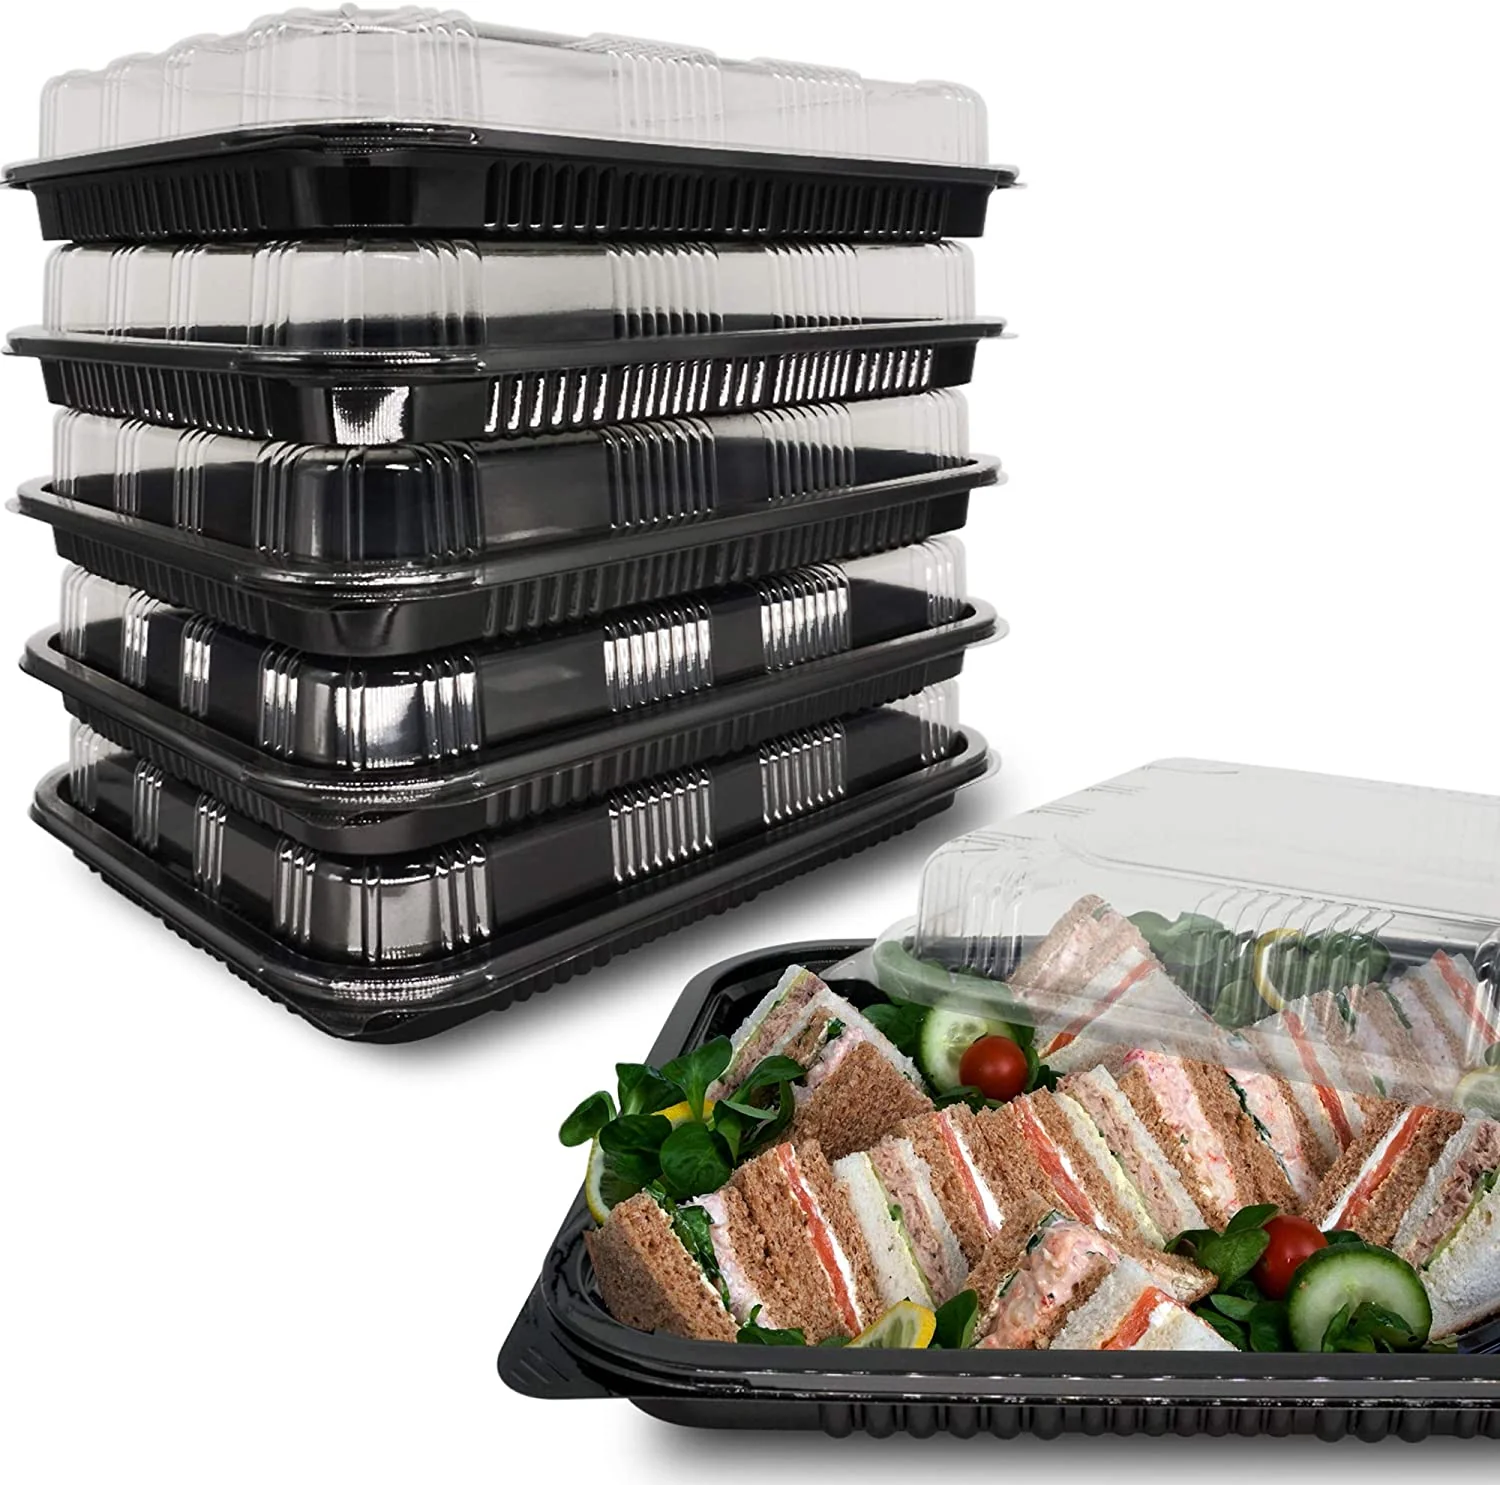 Empty stack of Sandwich Trays with Lids on the left with half of the sandwich tray filled with sandwiches with lid half open